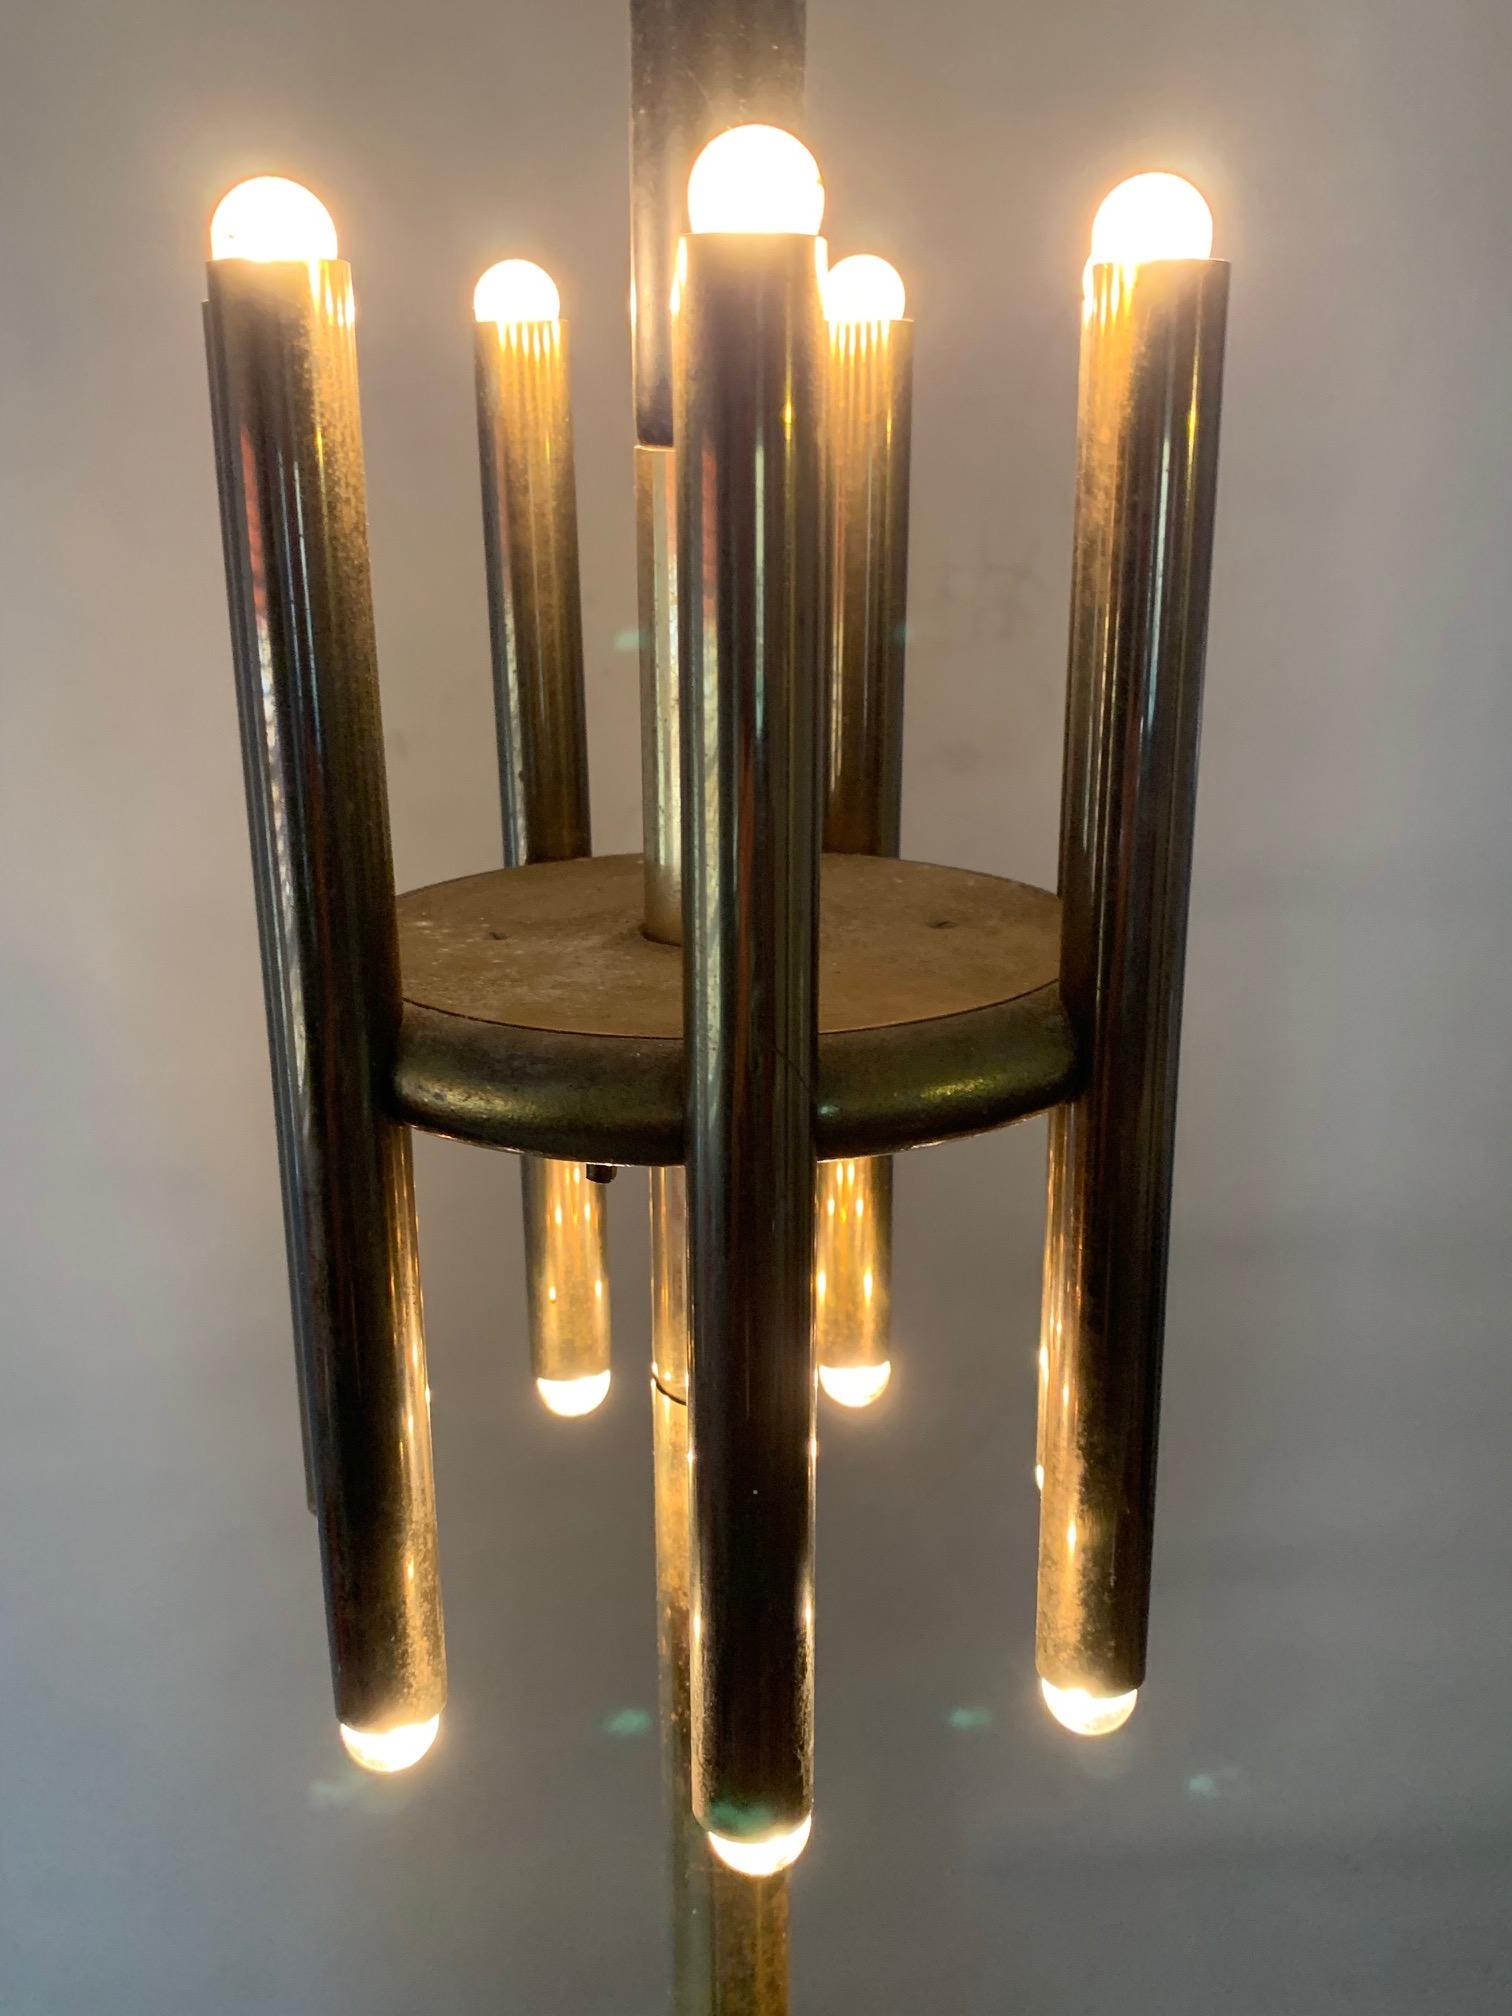 A great pair of vintage brass pole lamps. In the style of Lightolier or Stilnovo  made by Stiffel ca' 1950's. These have a lot of presence and style and height adjusts to 107